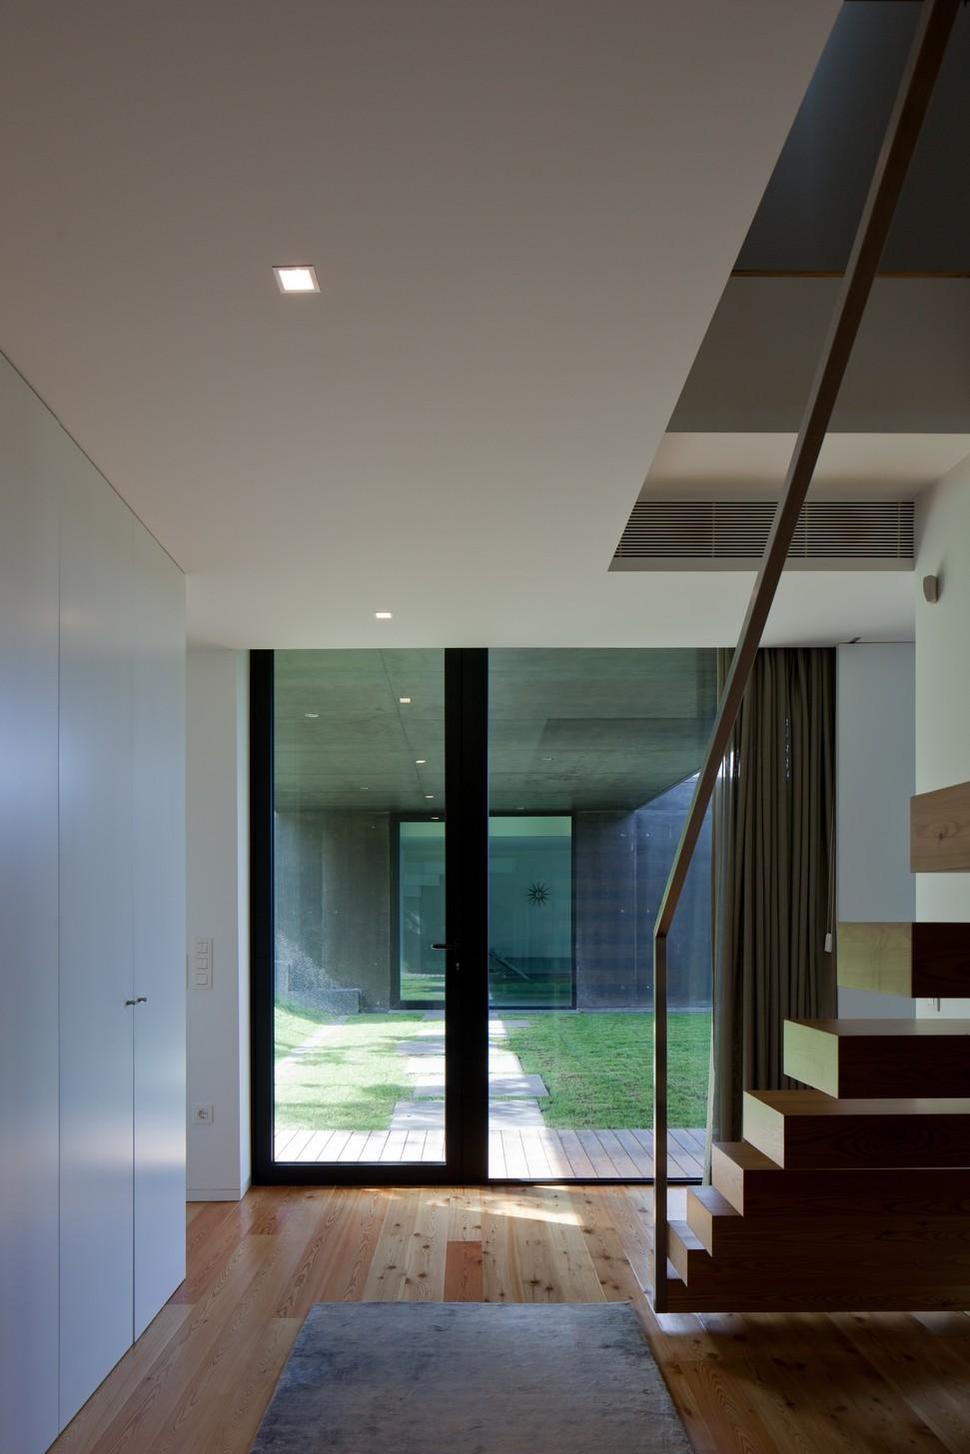 black-home-with-bright-interior-built-into-grassy-hillside-22-floating-stairs.jpg